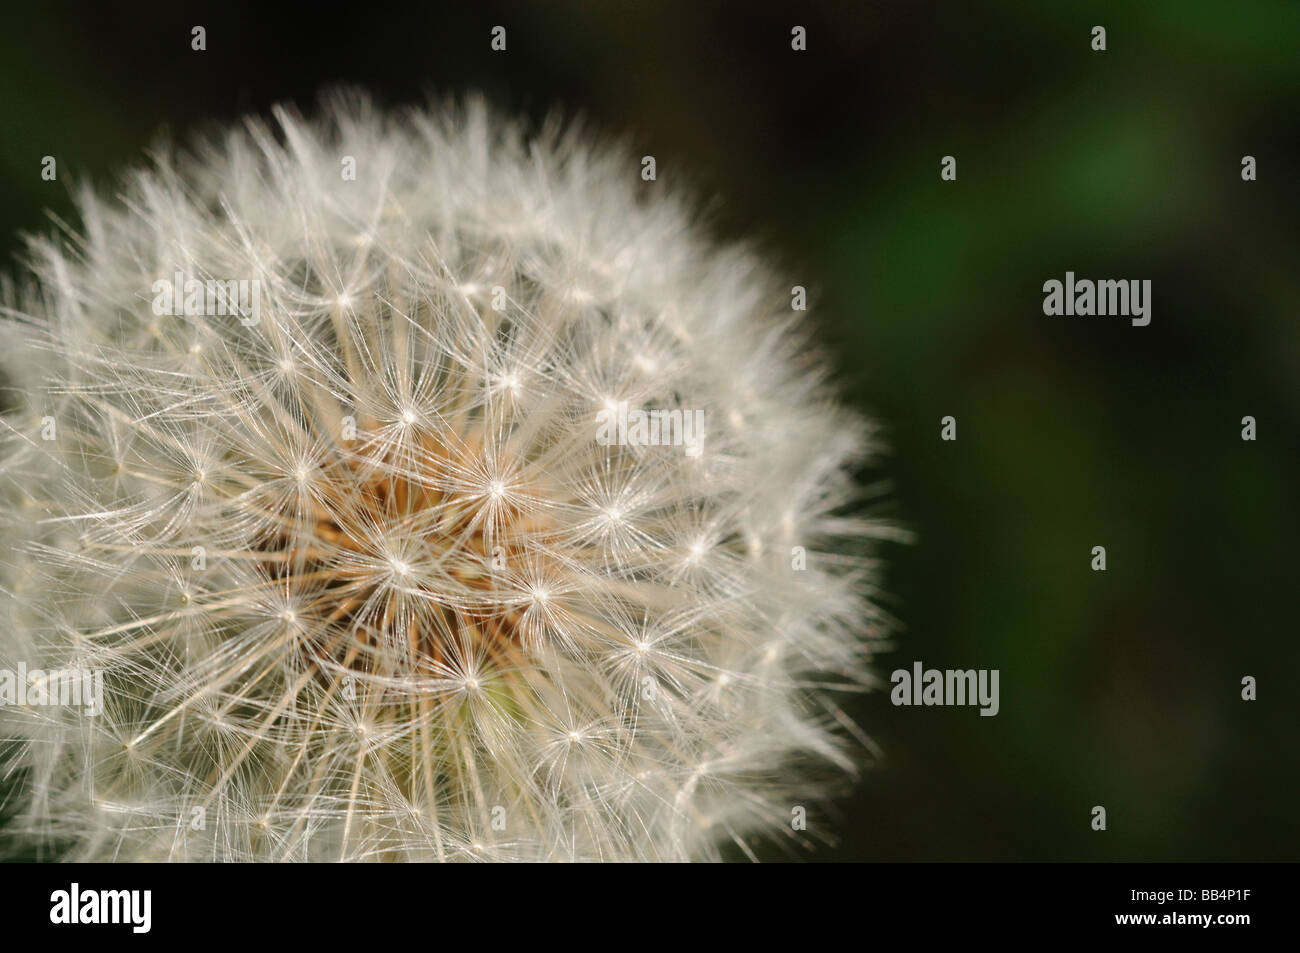 A Shot of Dandelions in seed Stock Photo